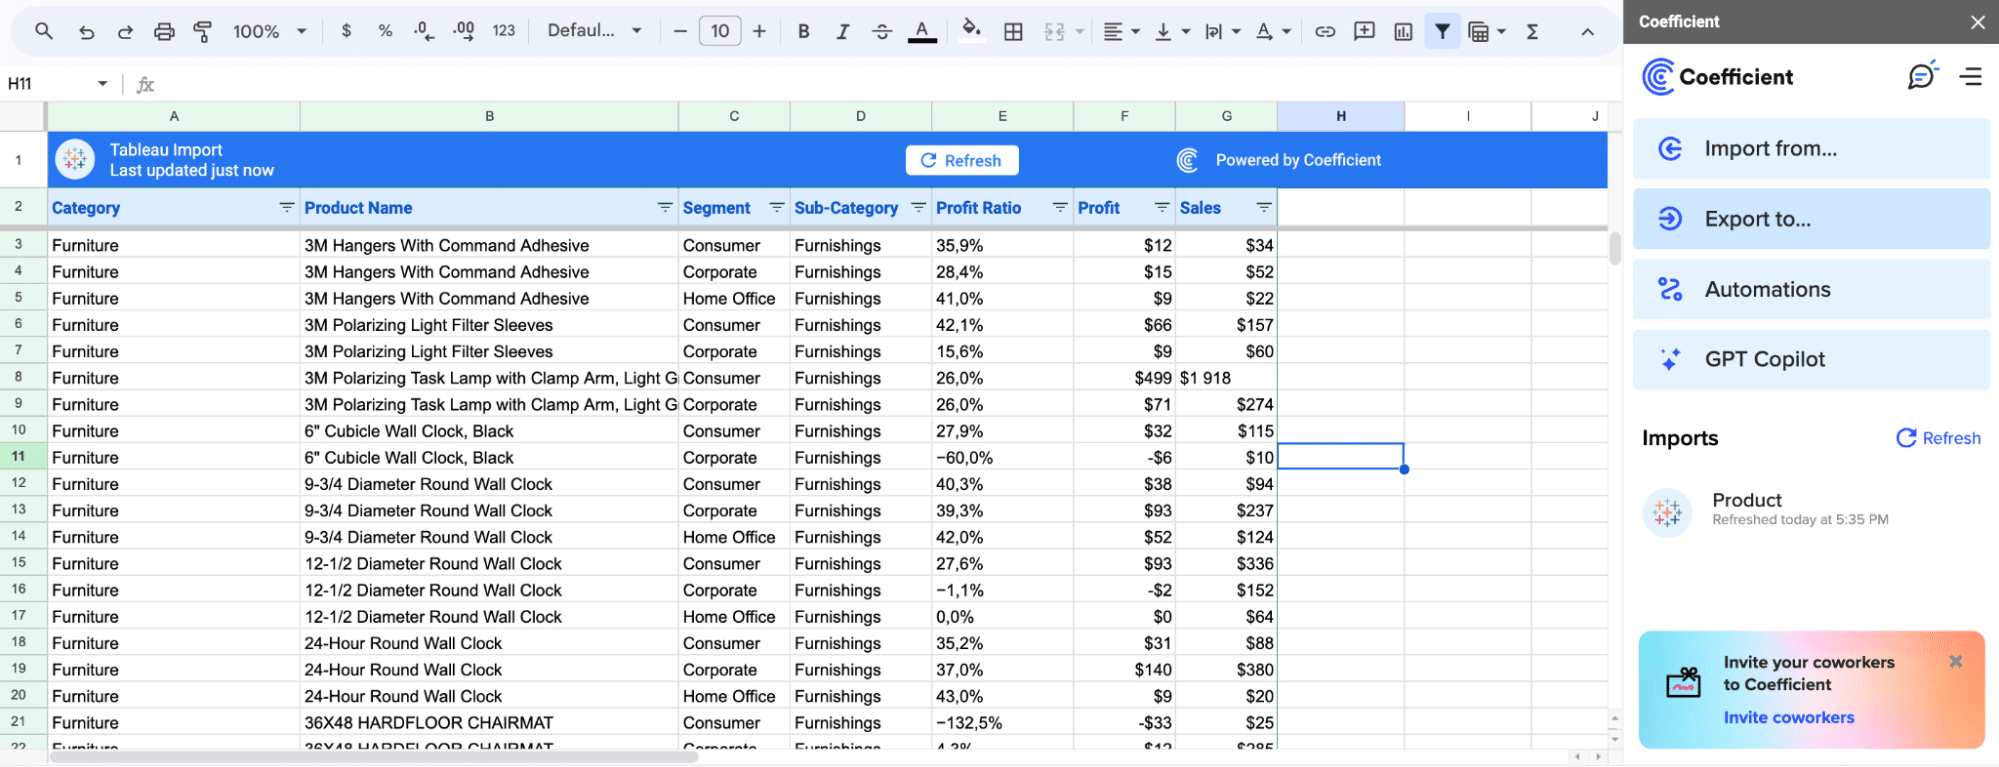 An image showing Coefficient from a spreadsheet